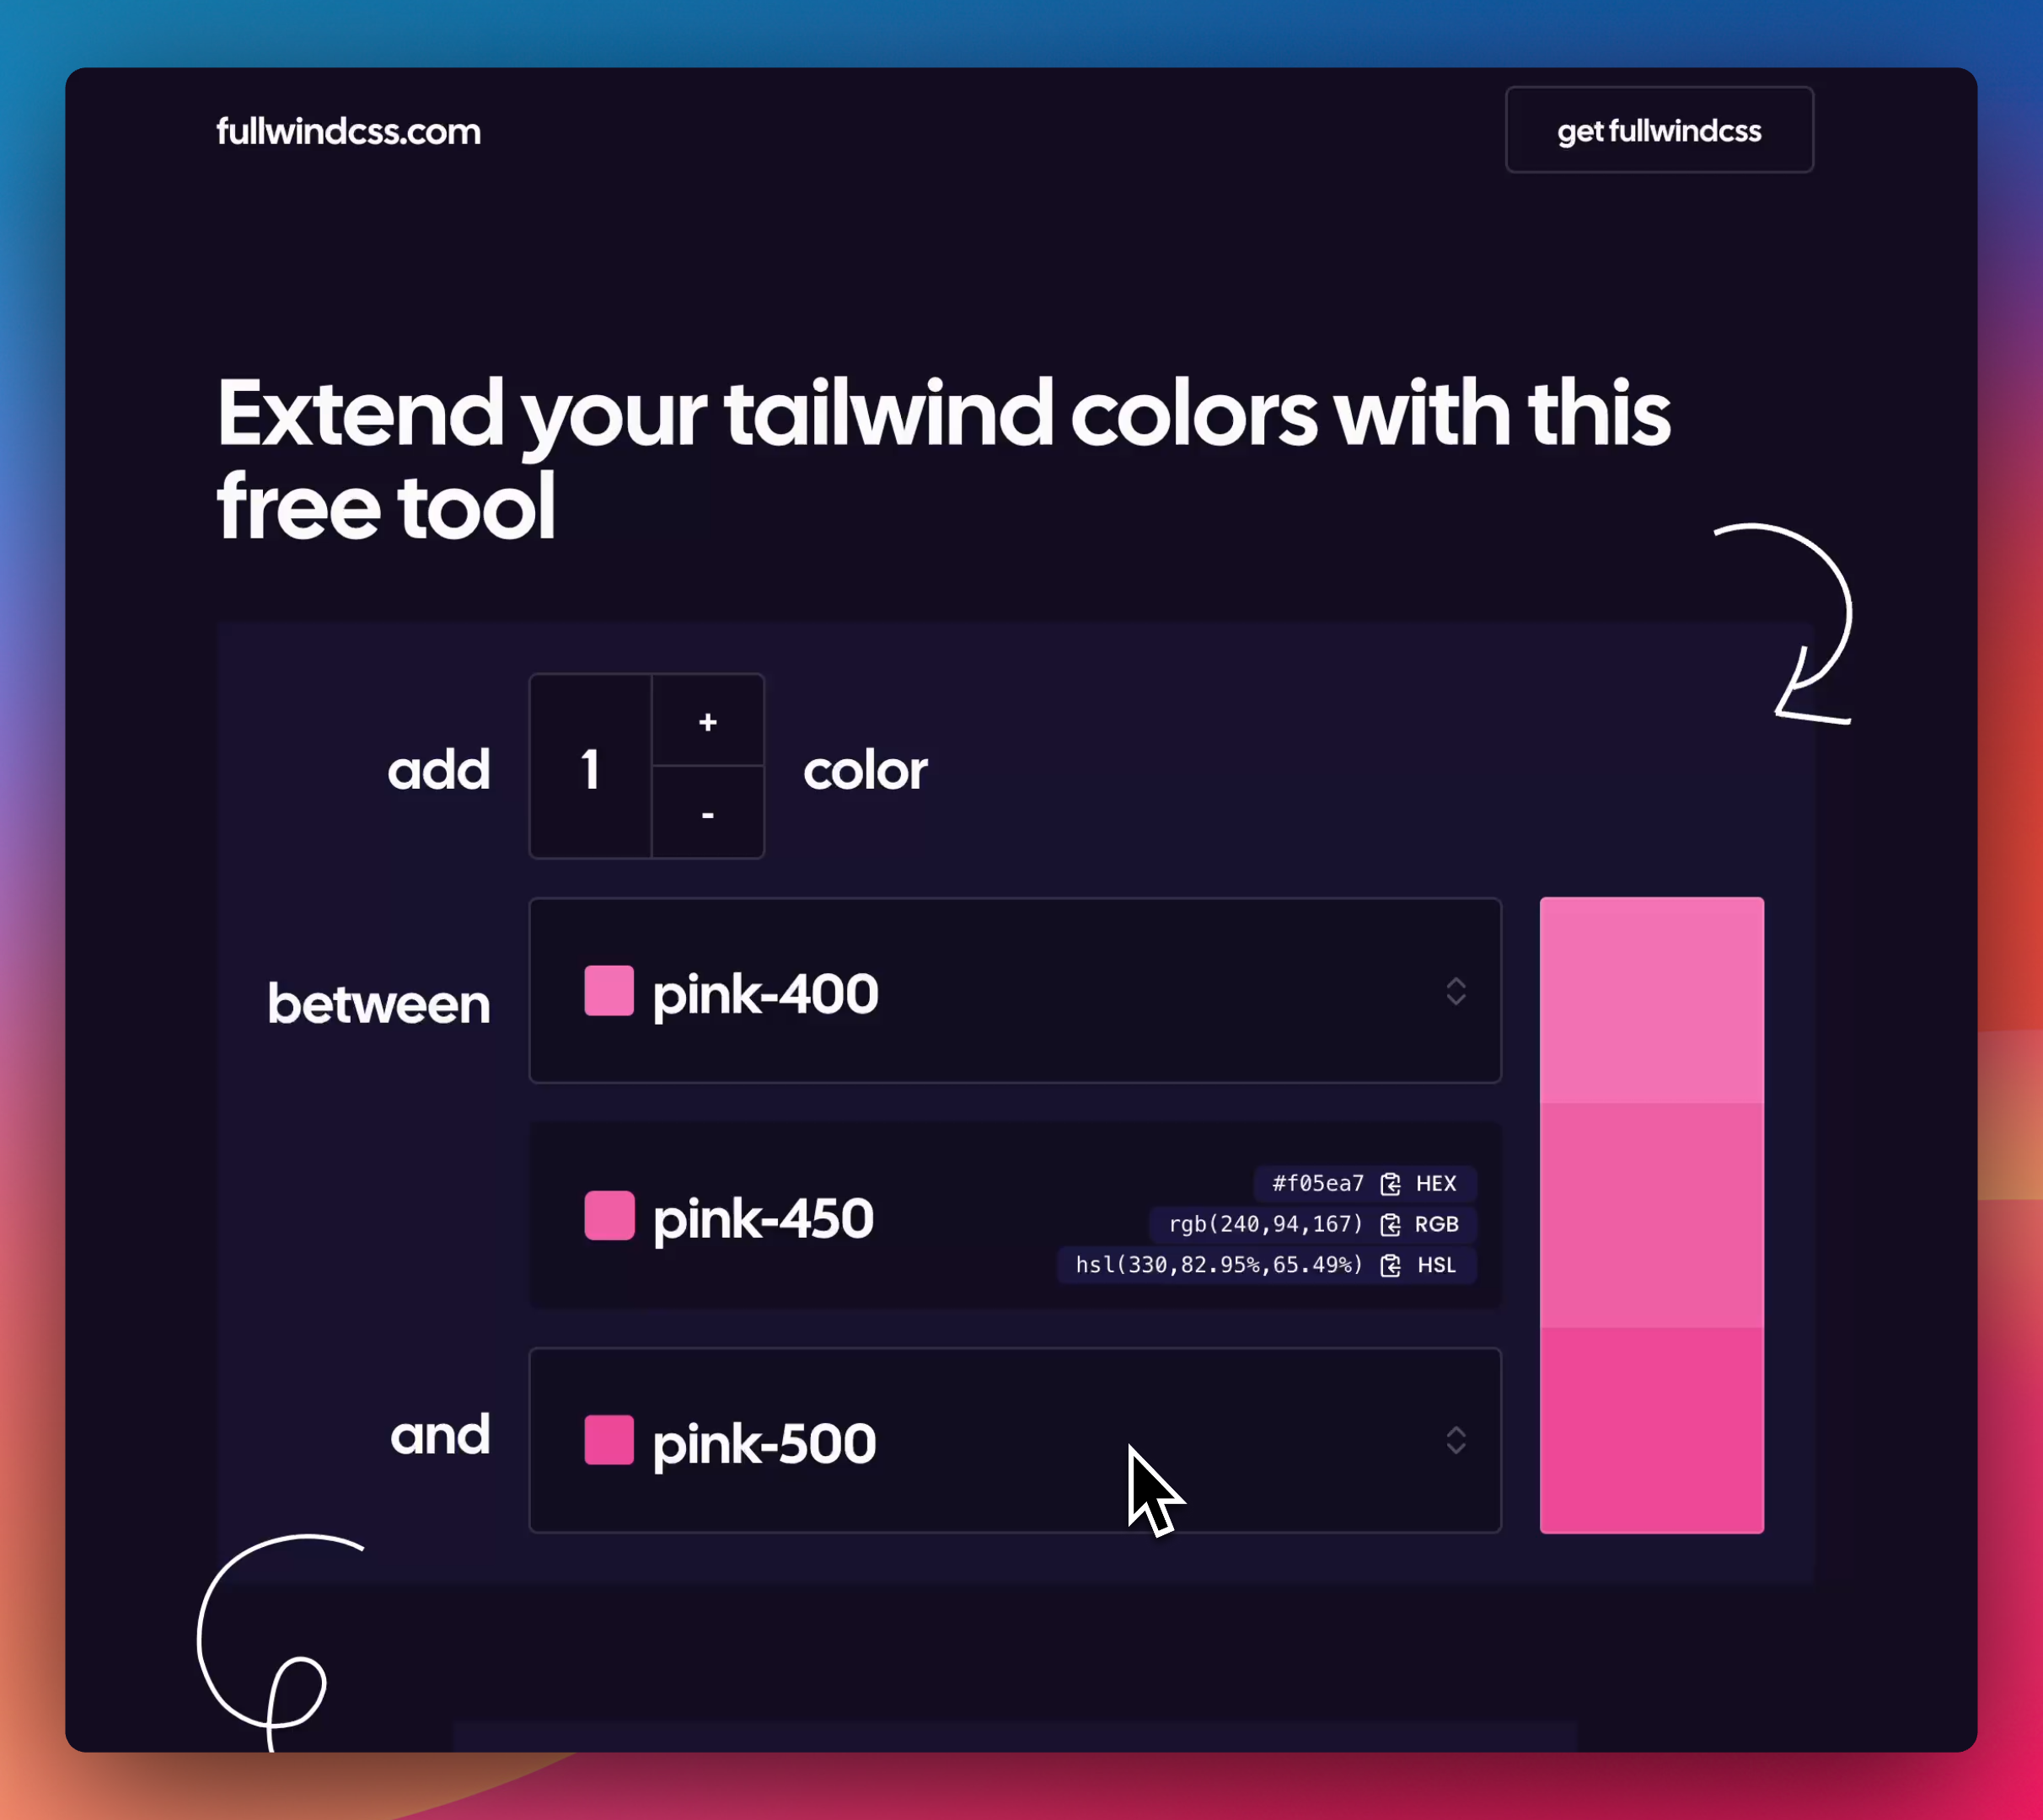 Extend Your Tailwind Colors (Website)